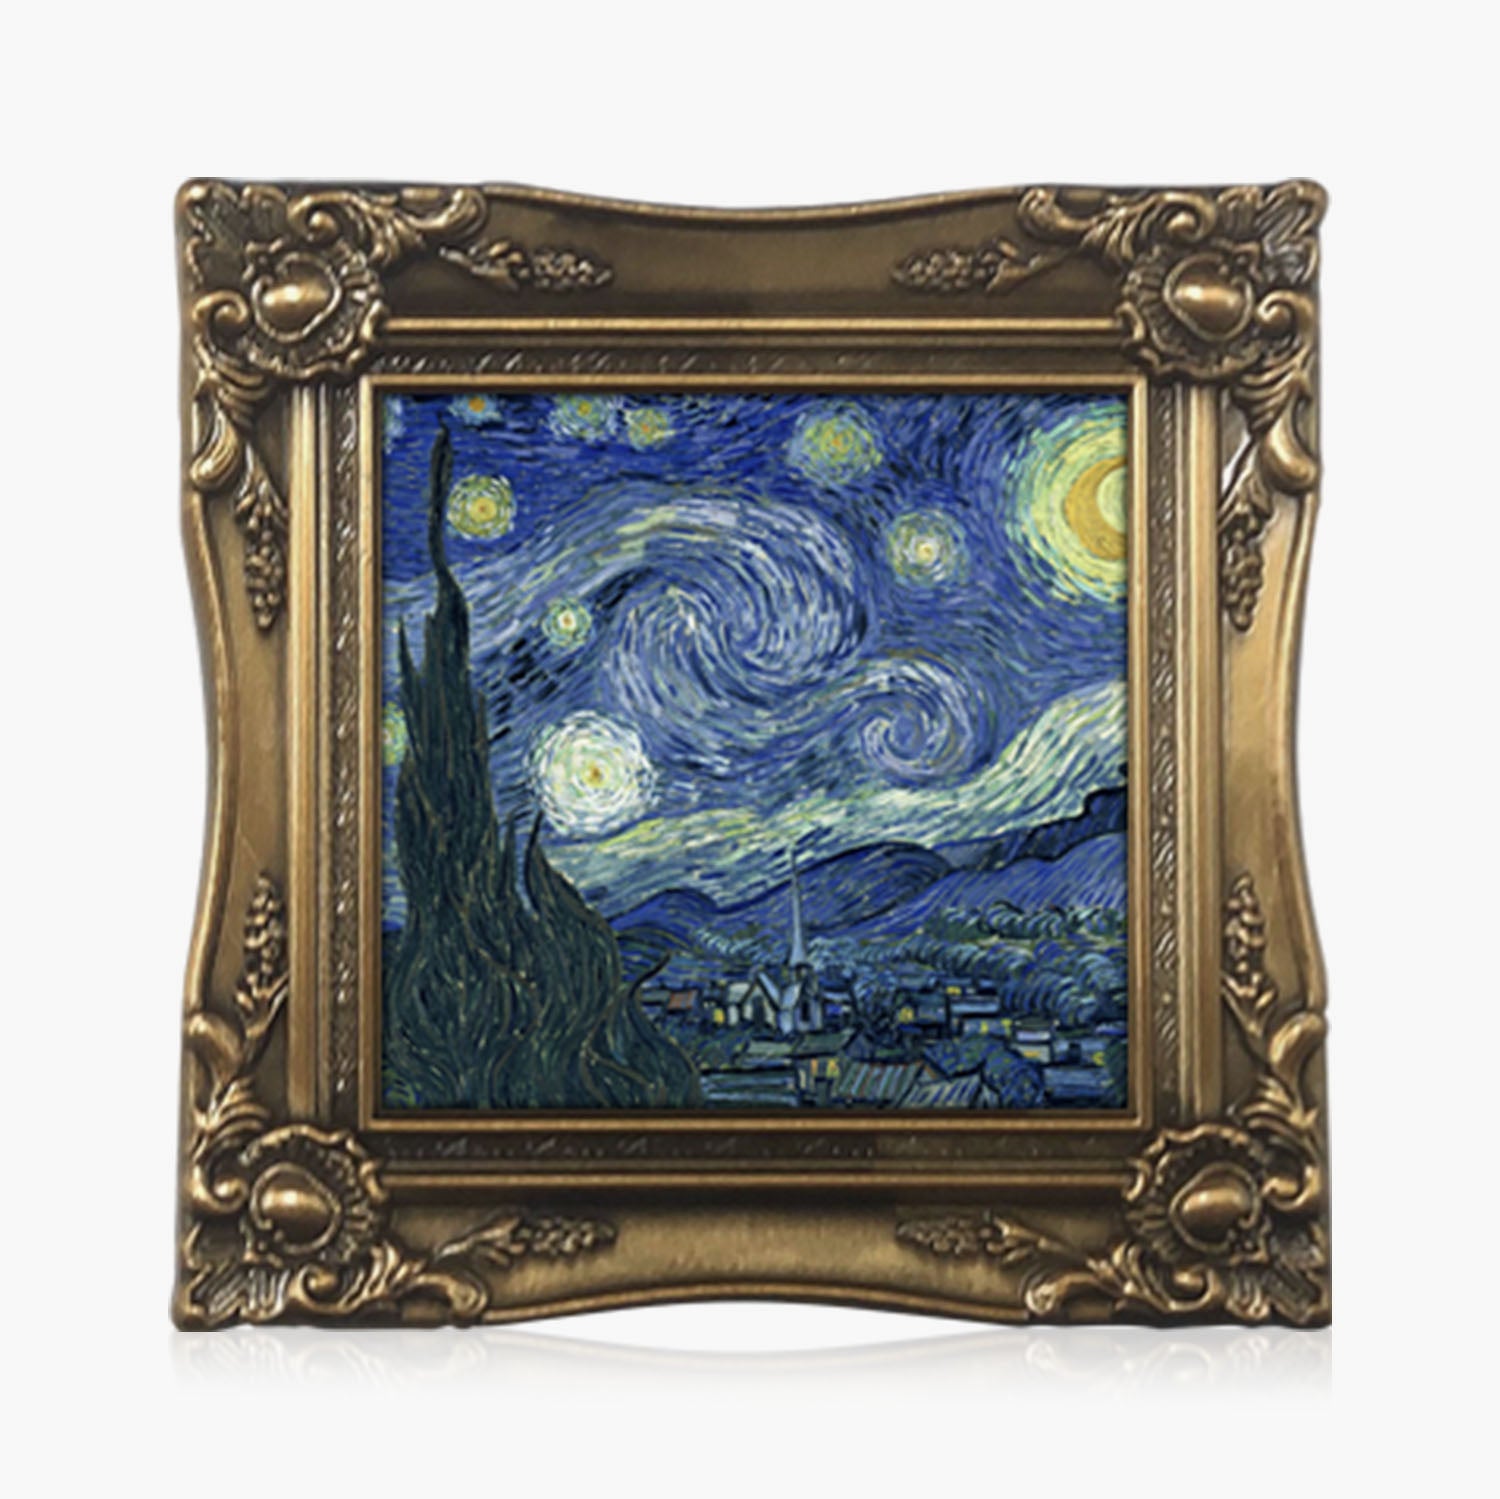 The Most Famous Paintings - Van Gogh - Starry Night